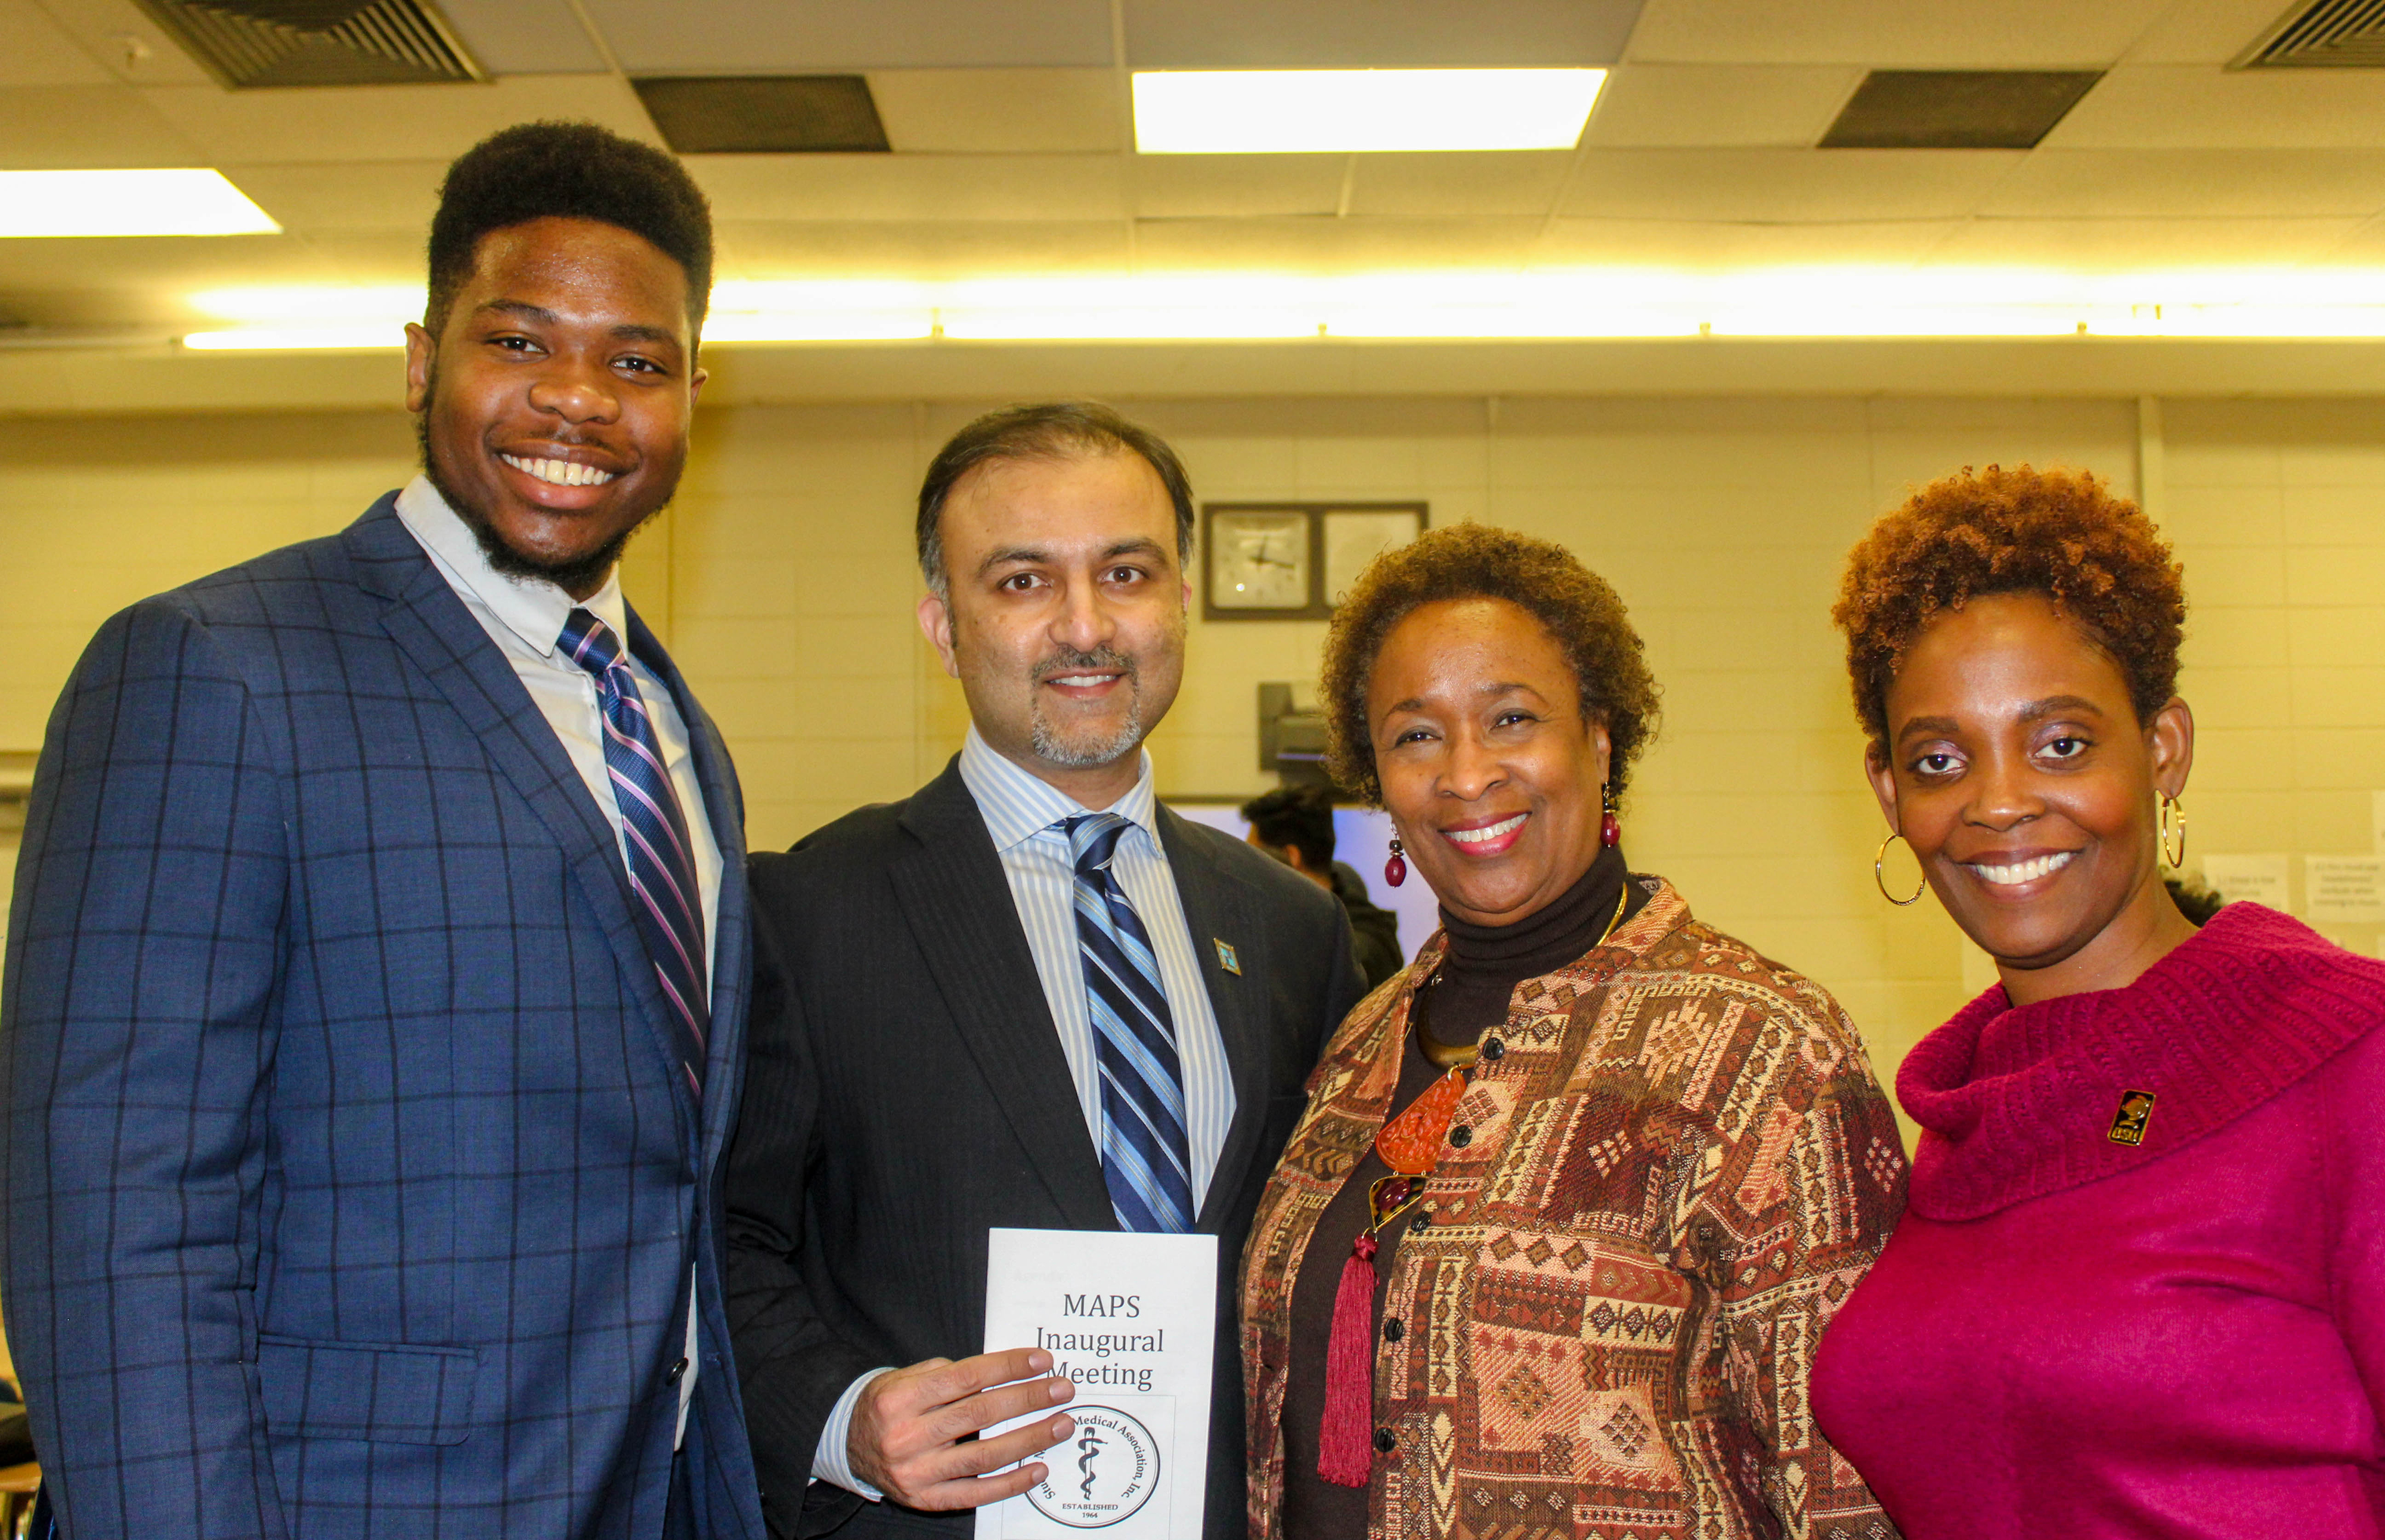 (L-r) Jared Jeffrey, biological sciences major, Dr. Omar Khan of Christiana Care, Dr. Marsha Horton, Dean of the College of Health & Behavioral Sciences, and Dr. Jacqueline Washington, Associate Dean of the same college, pose for a photo after the recent inaugural meeting of the University's Minority Association of Pre-medical Students